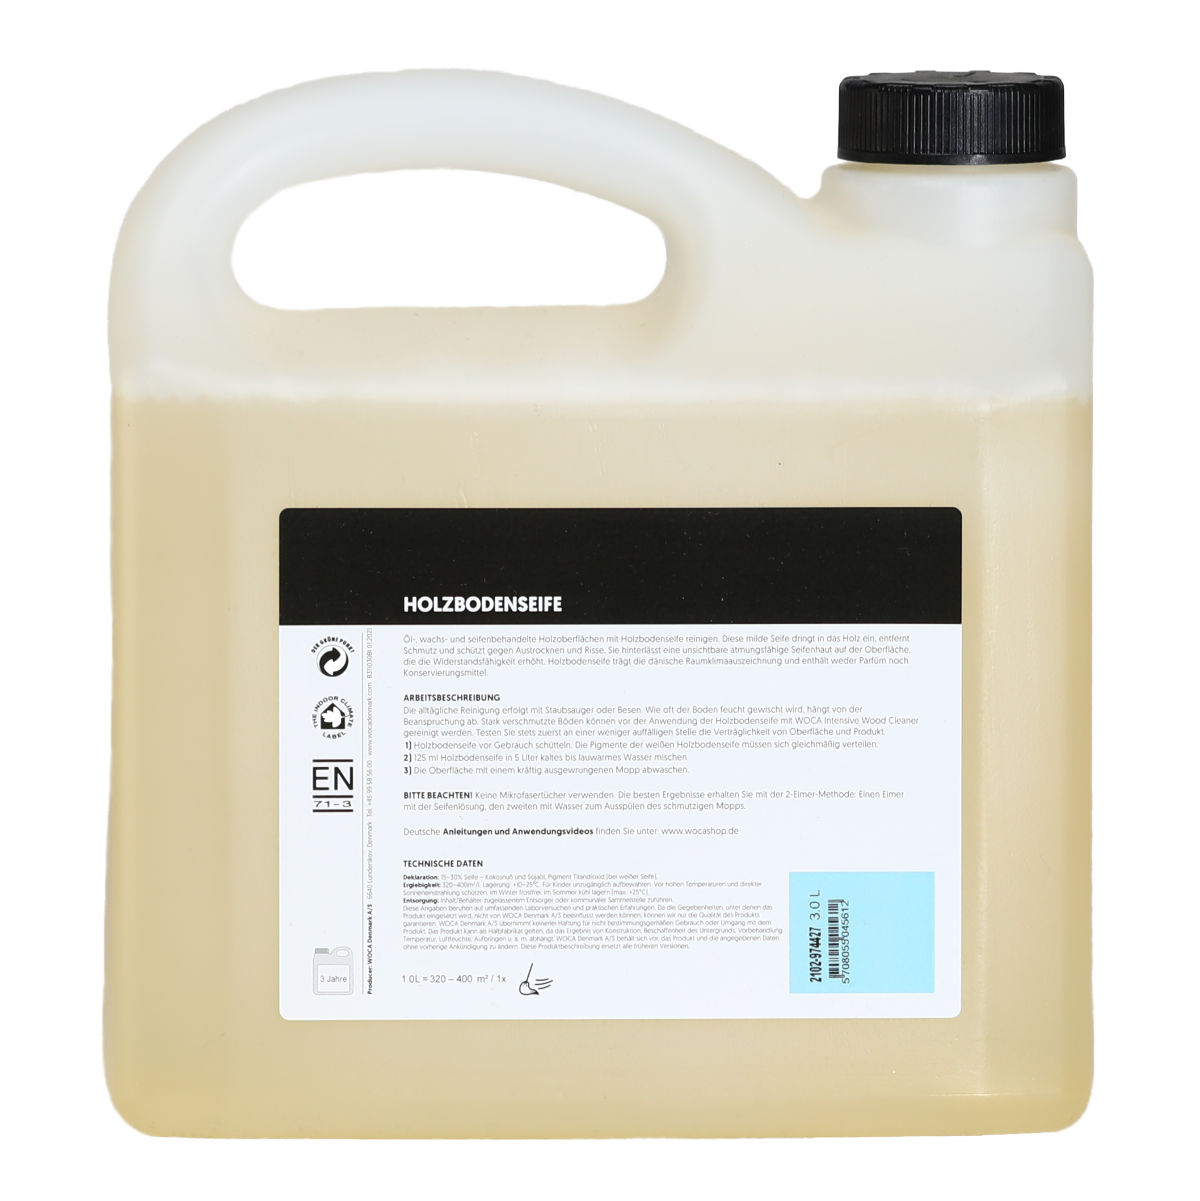 WOCA Holzbodenseife natur 3l - 20% extra